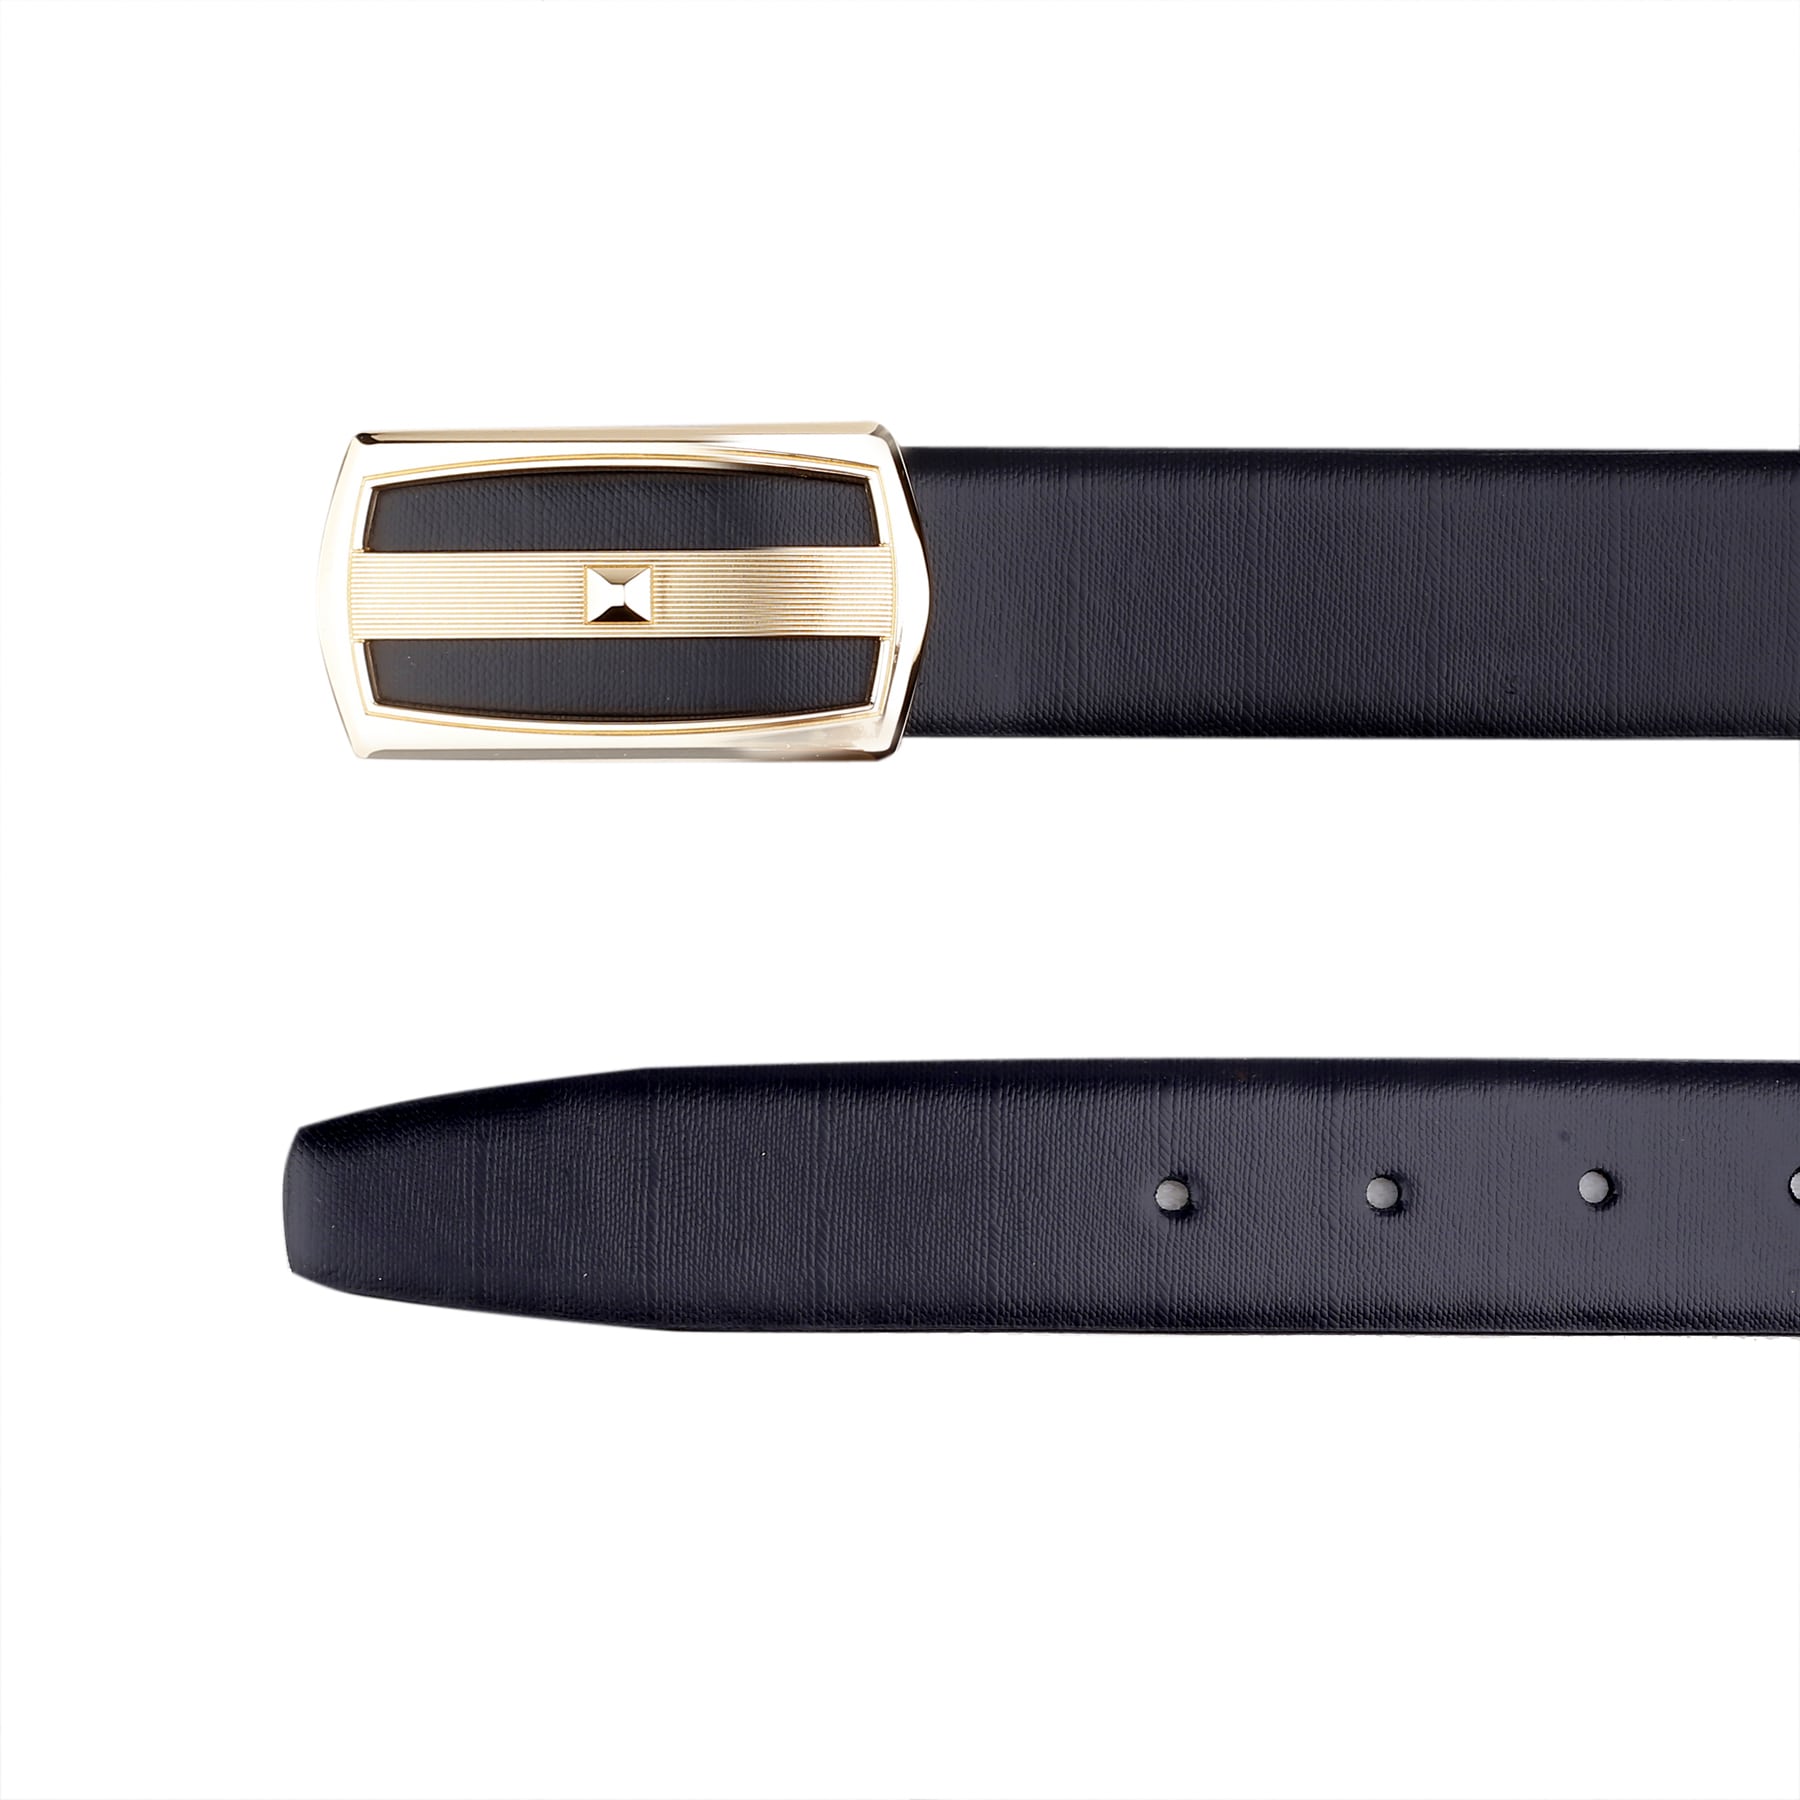 Bacca Bucci Premium Leather Formal Dress Belts with a Stylish Finish and a Nickel-Free Buckle